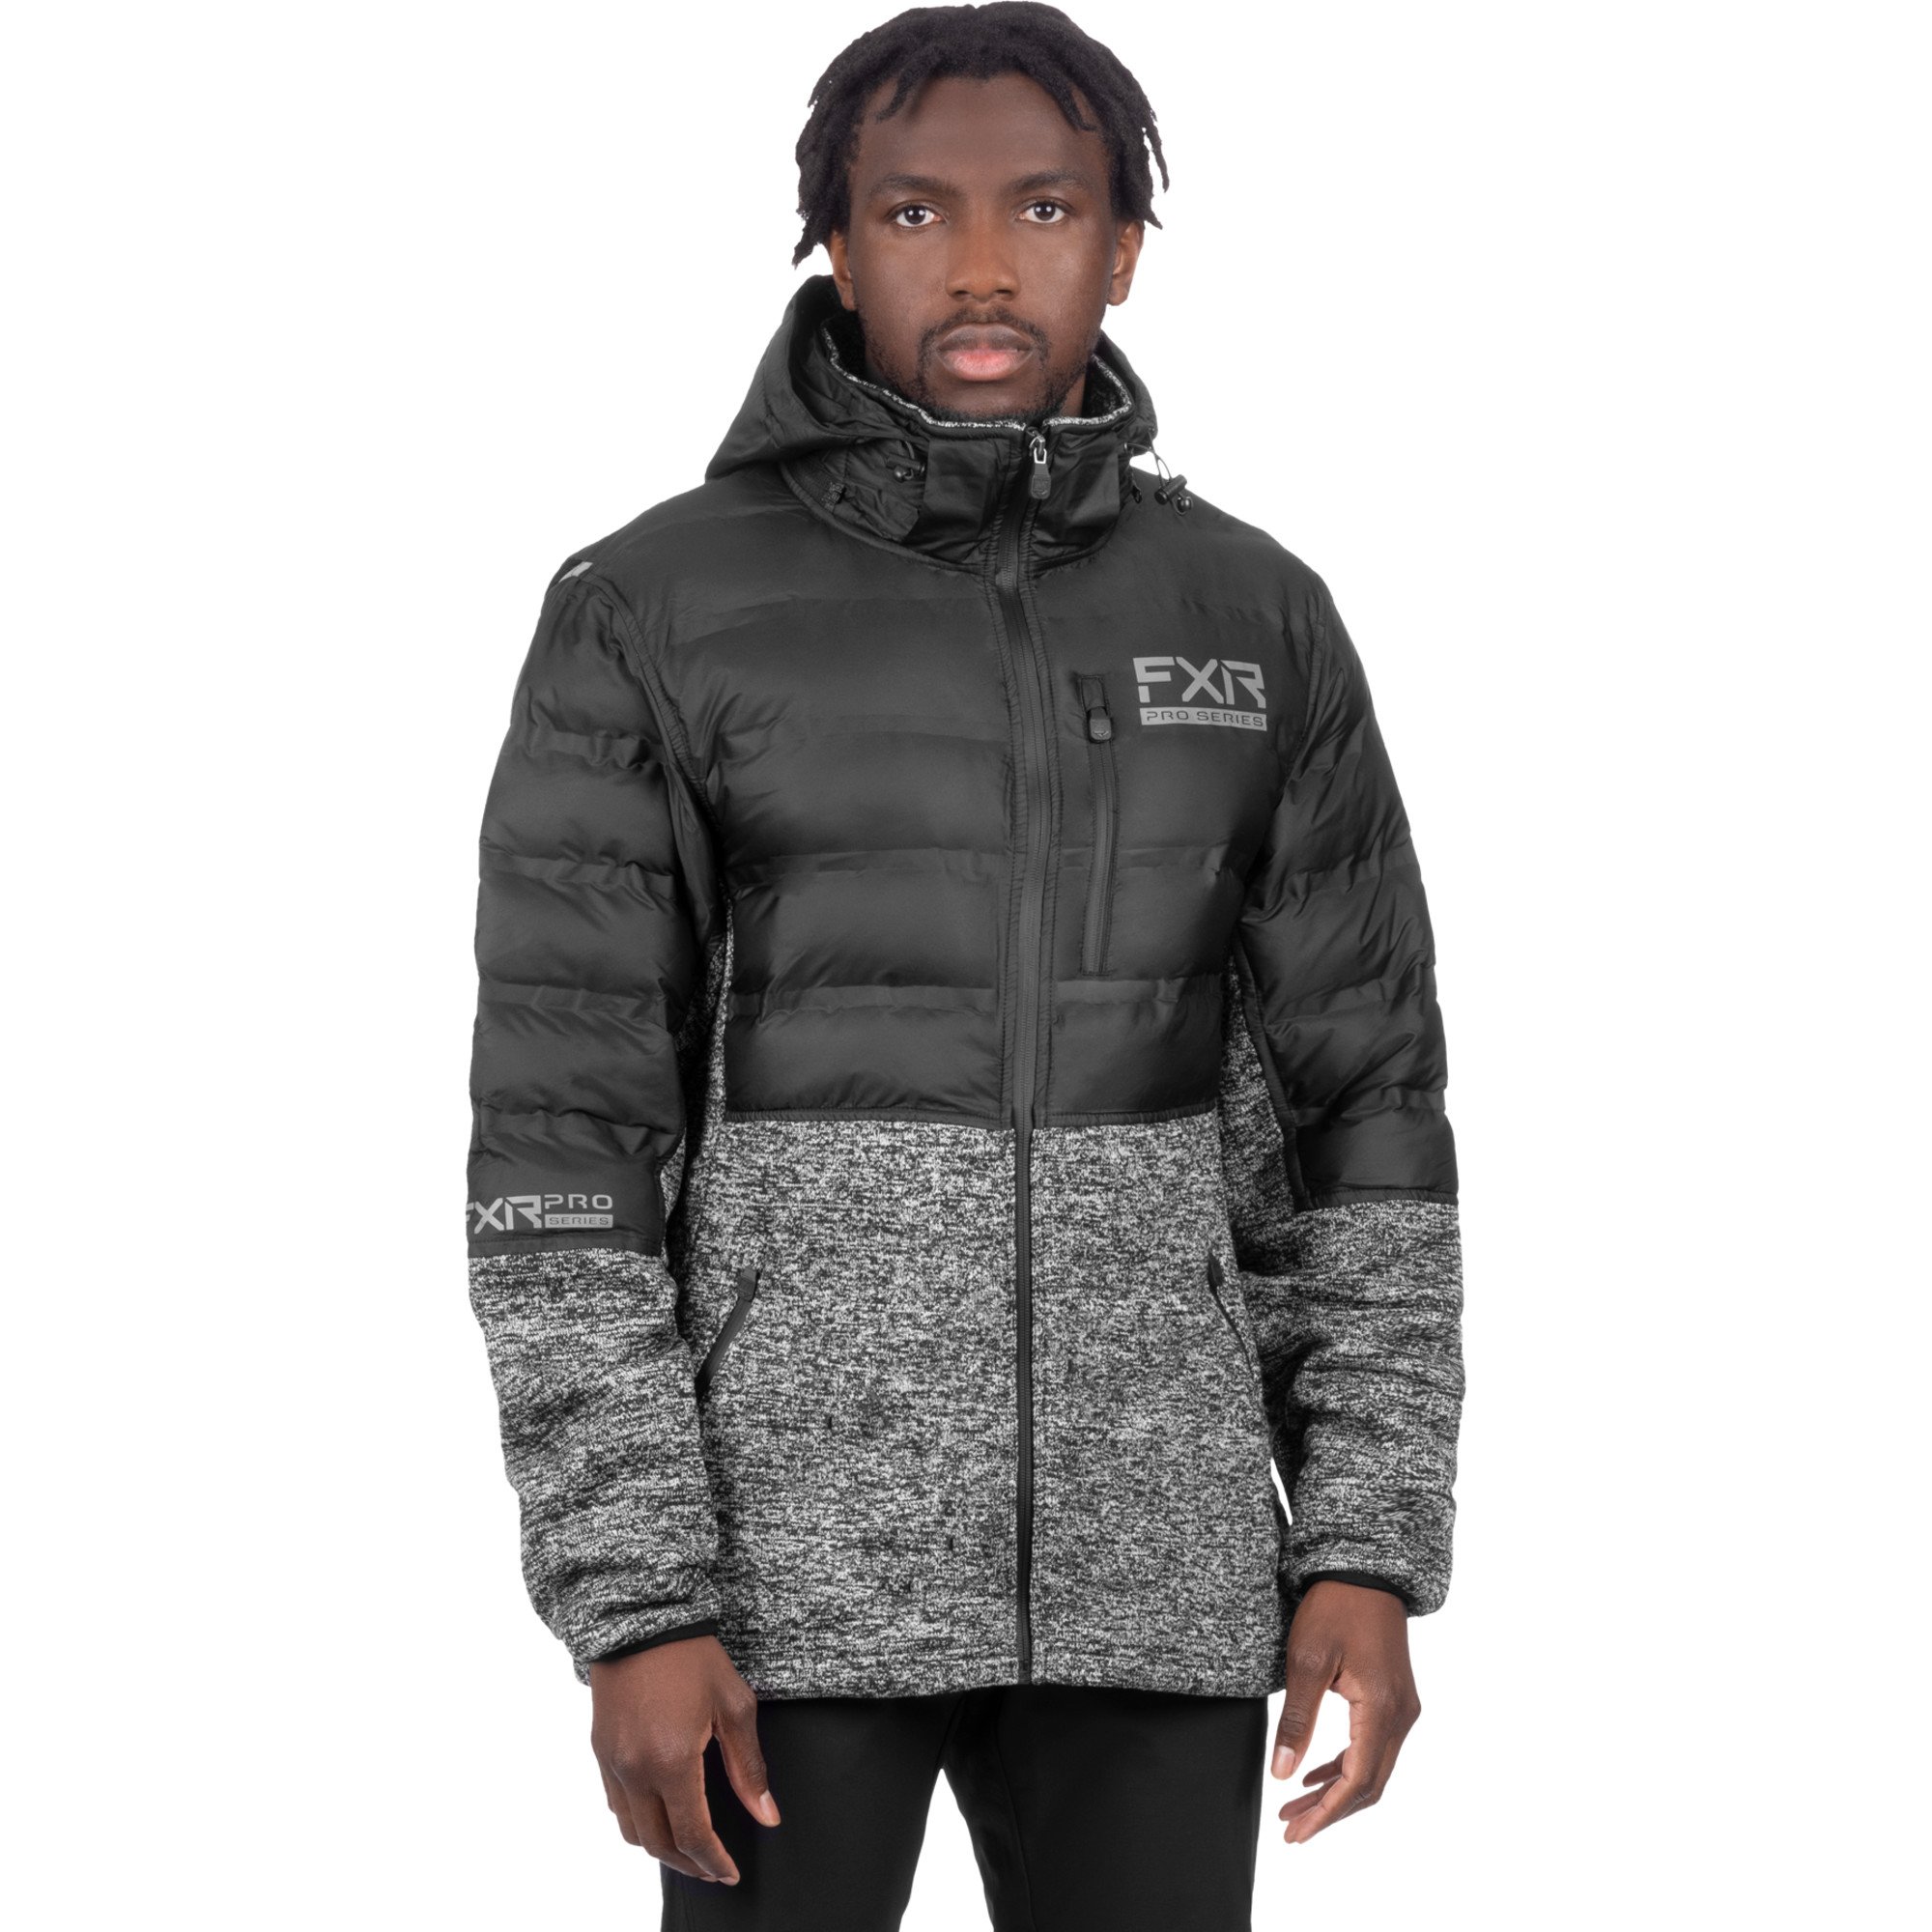 mode hommes kangourous par fxr racing excursion lite hybrid quilted